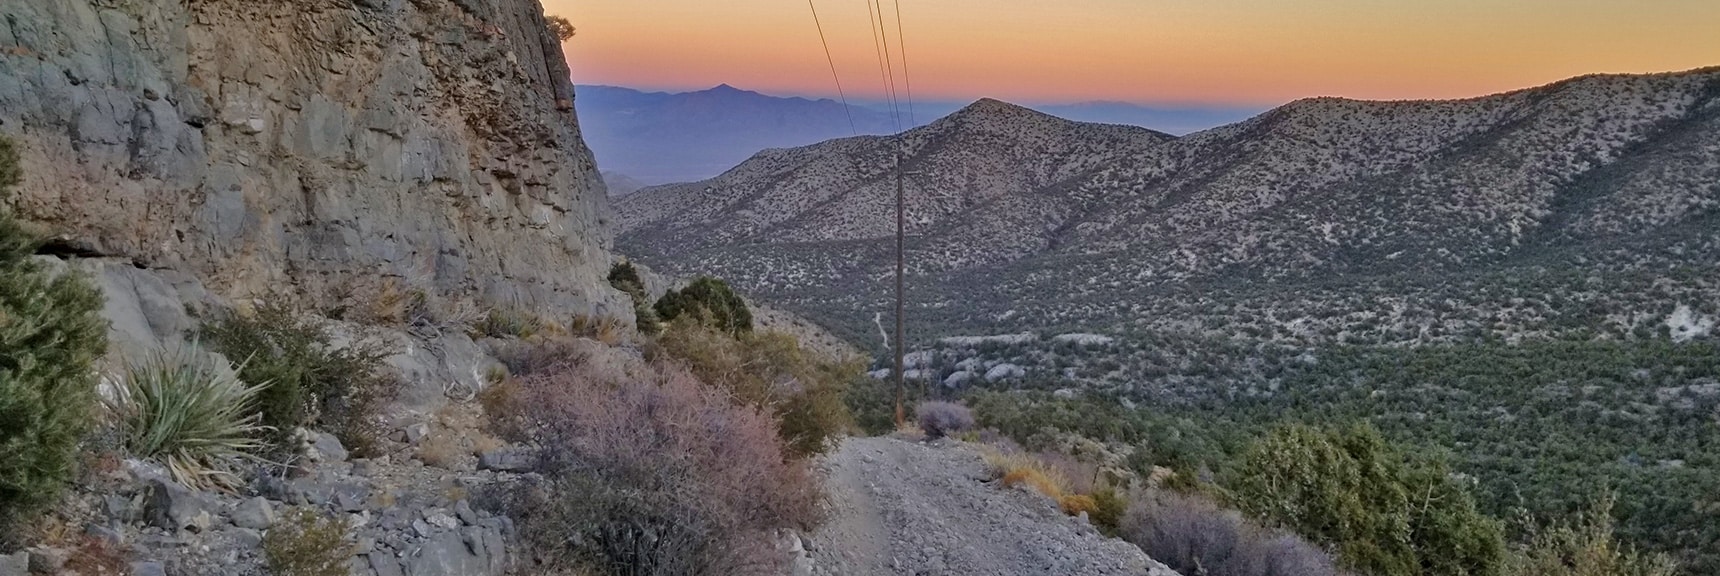 Sunset View Down Lucky Strike Road from About 1/4th Mile Below Angel Peak | Angel Peak via Lucky Strike Road | Mt Charleston Wilderness | Spring Mountains, Nevada